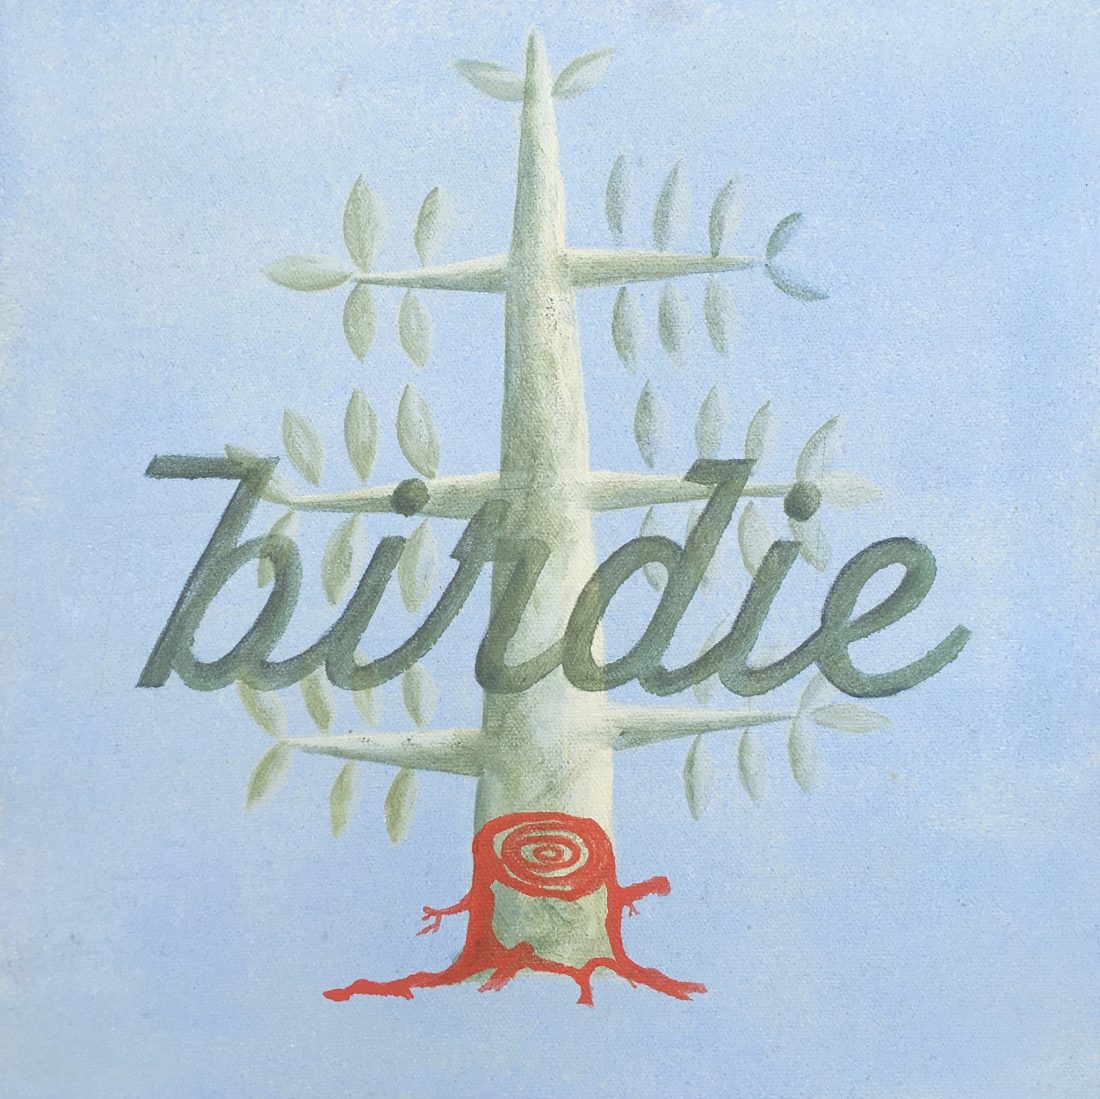 Birdie: A painting Made by Wanderlust